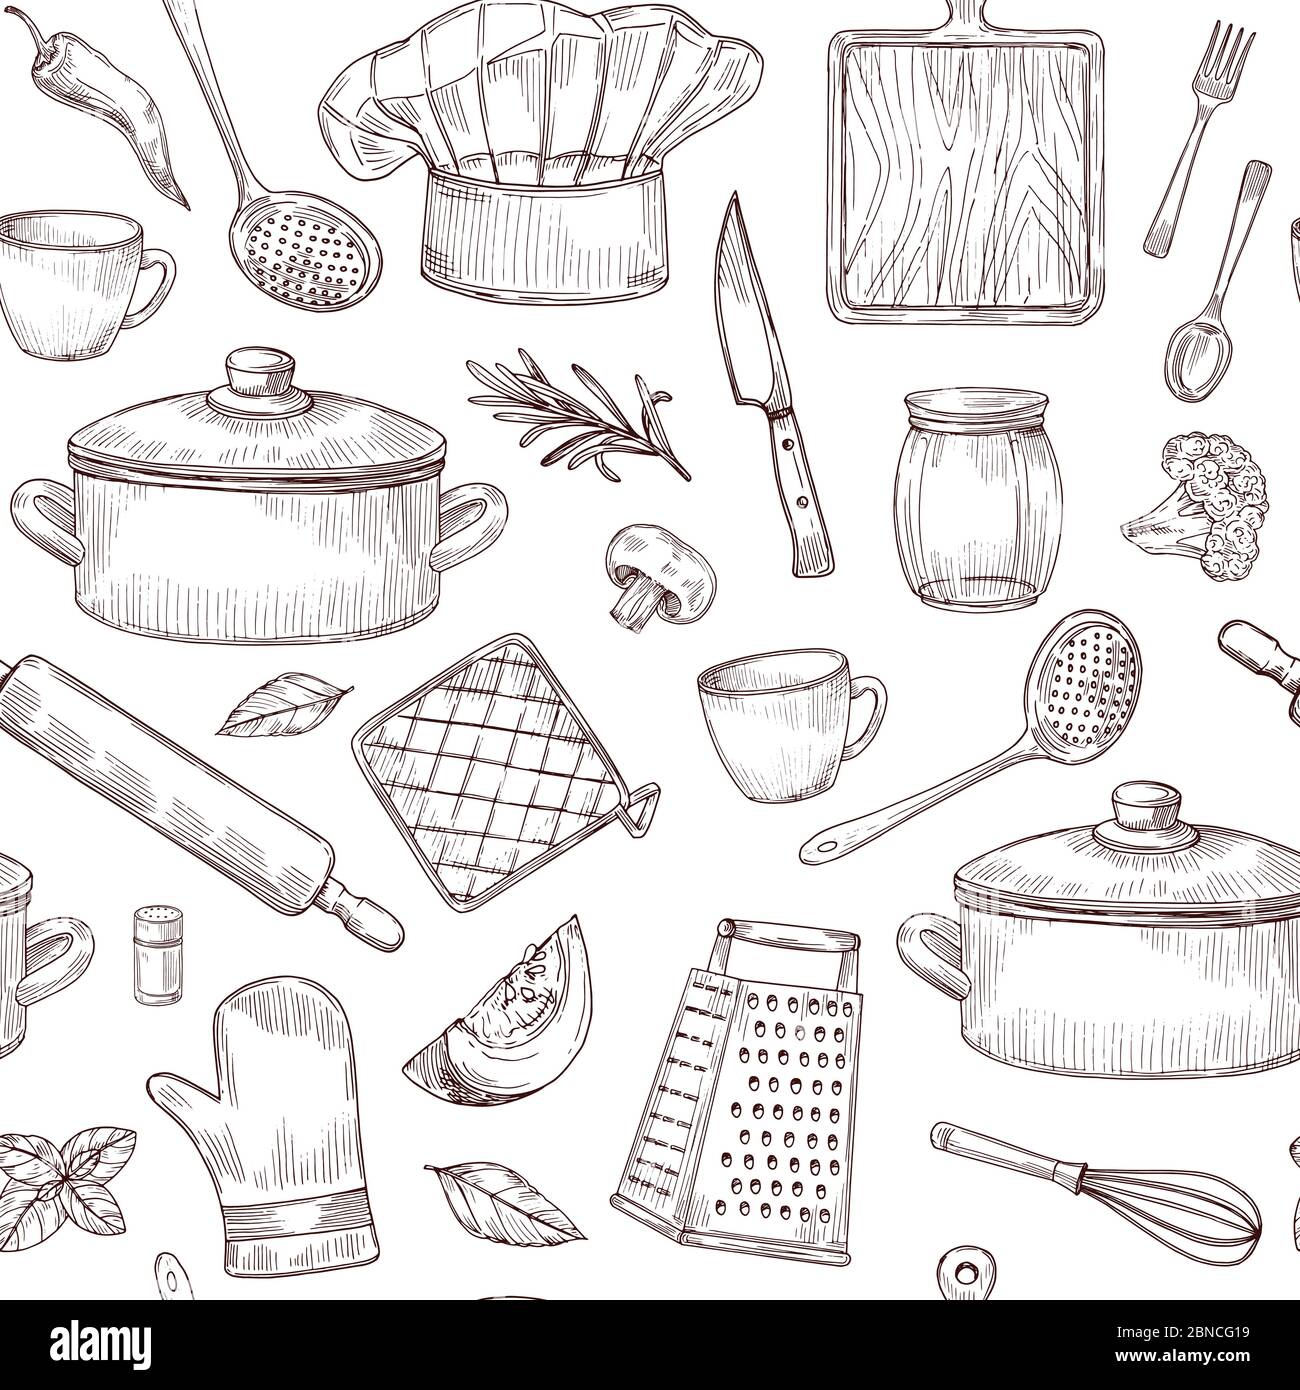 Kitchen tools seamless pattern. Sketch cooking utensils hand drawn kitchenware. Engraved kitchen elements vector background. Kitchenware equipment, cookware accessory, saucepan and spoon illustration Stock Vector